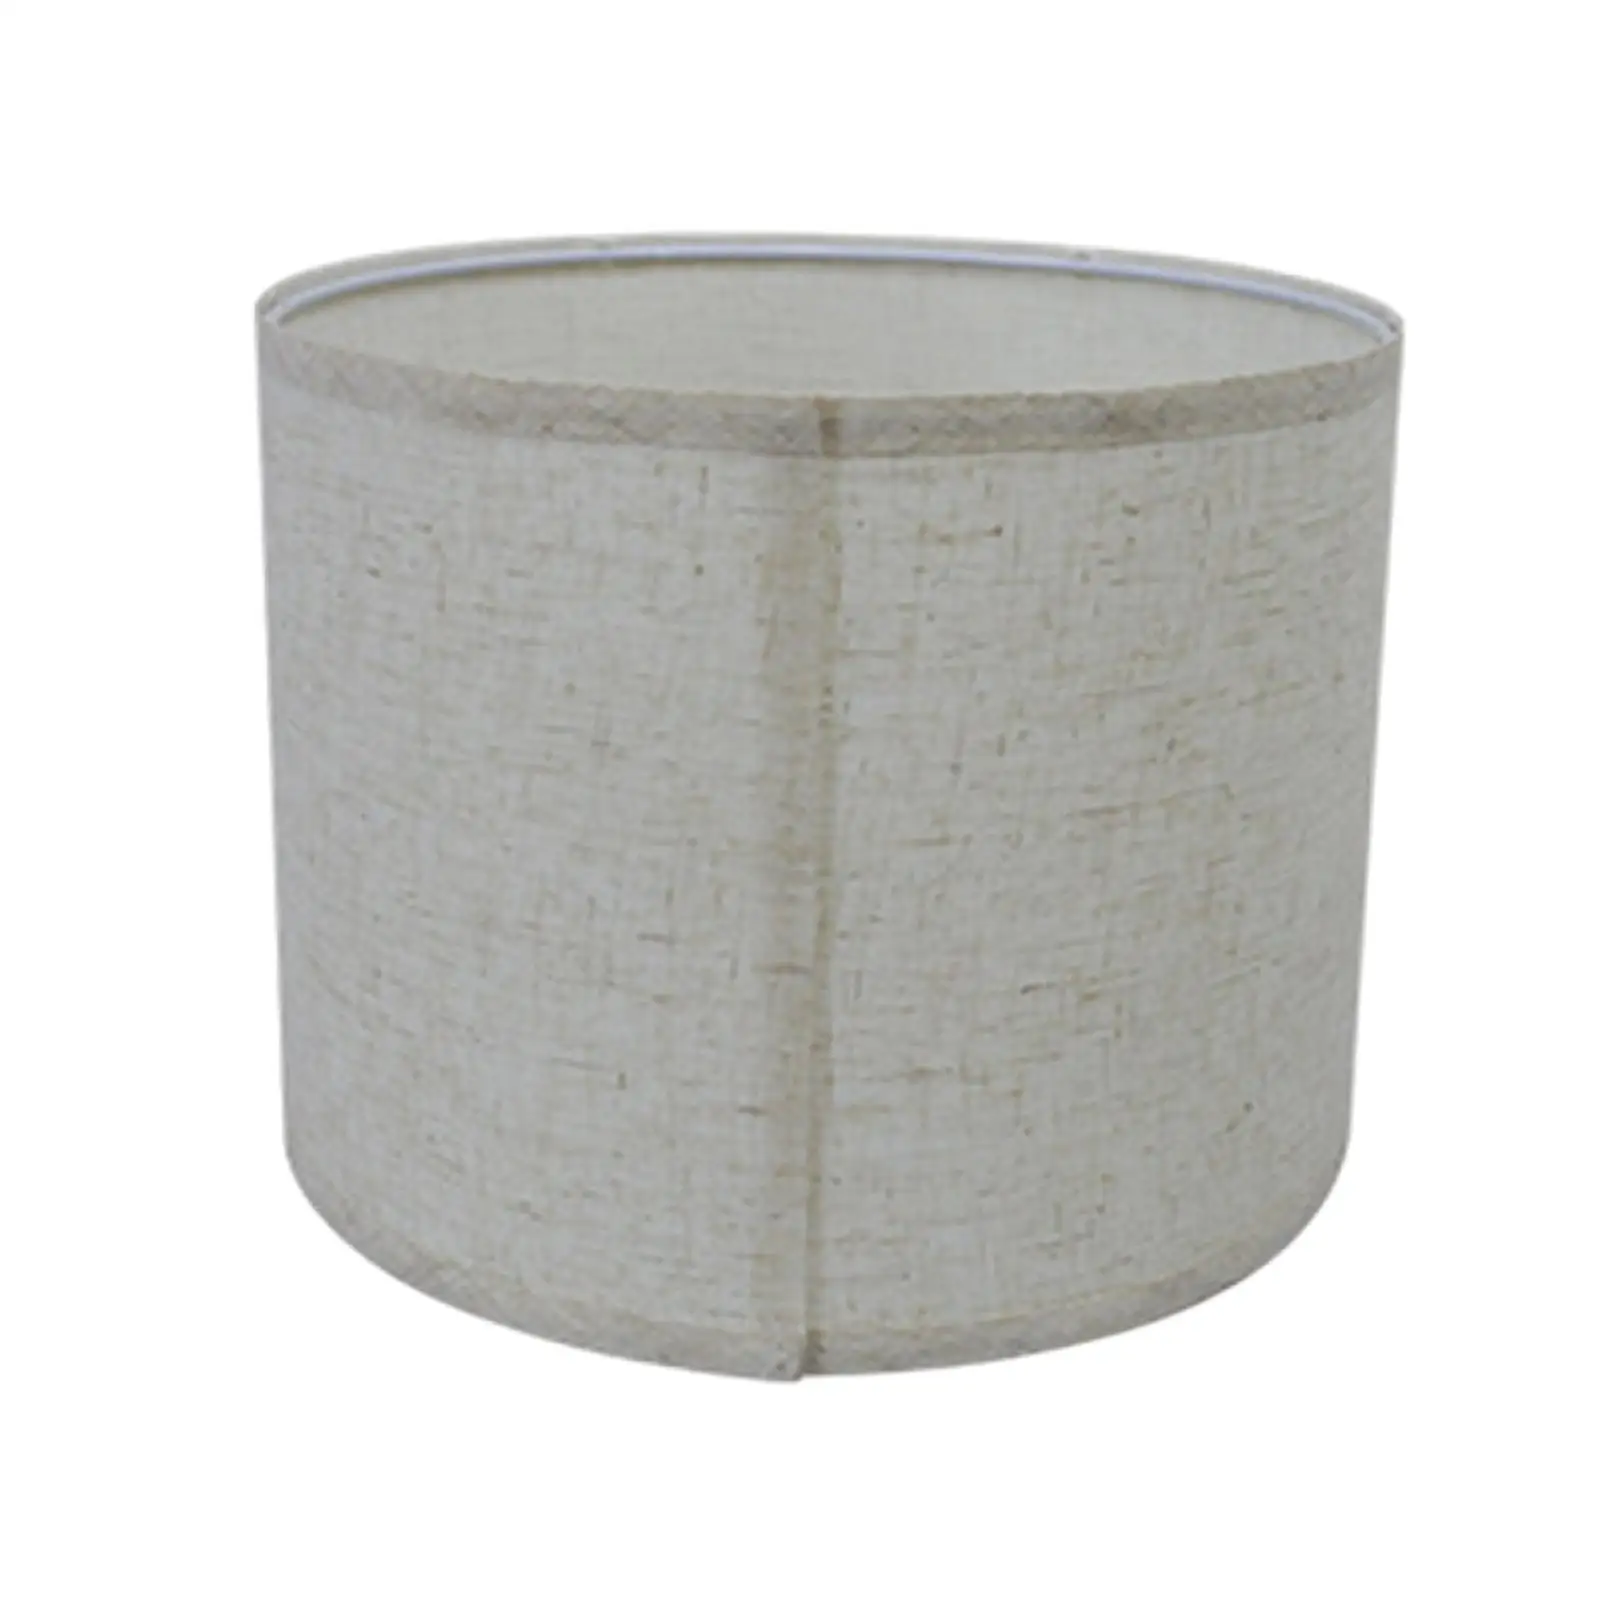 Drum Lamp Shade  Decoration Barrel Lampshade for Bedside Lamp